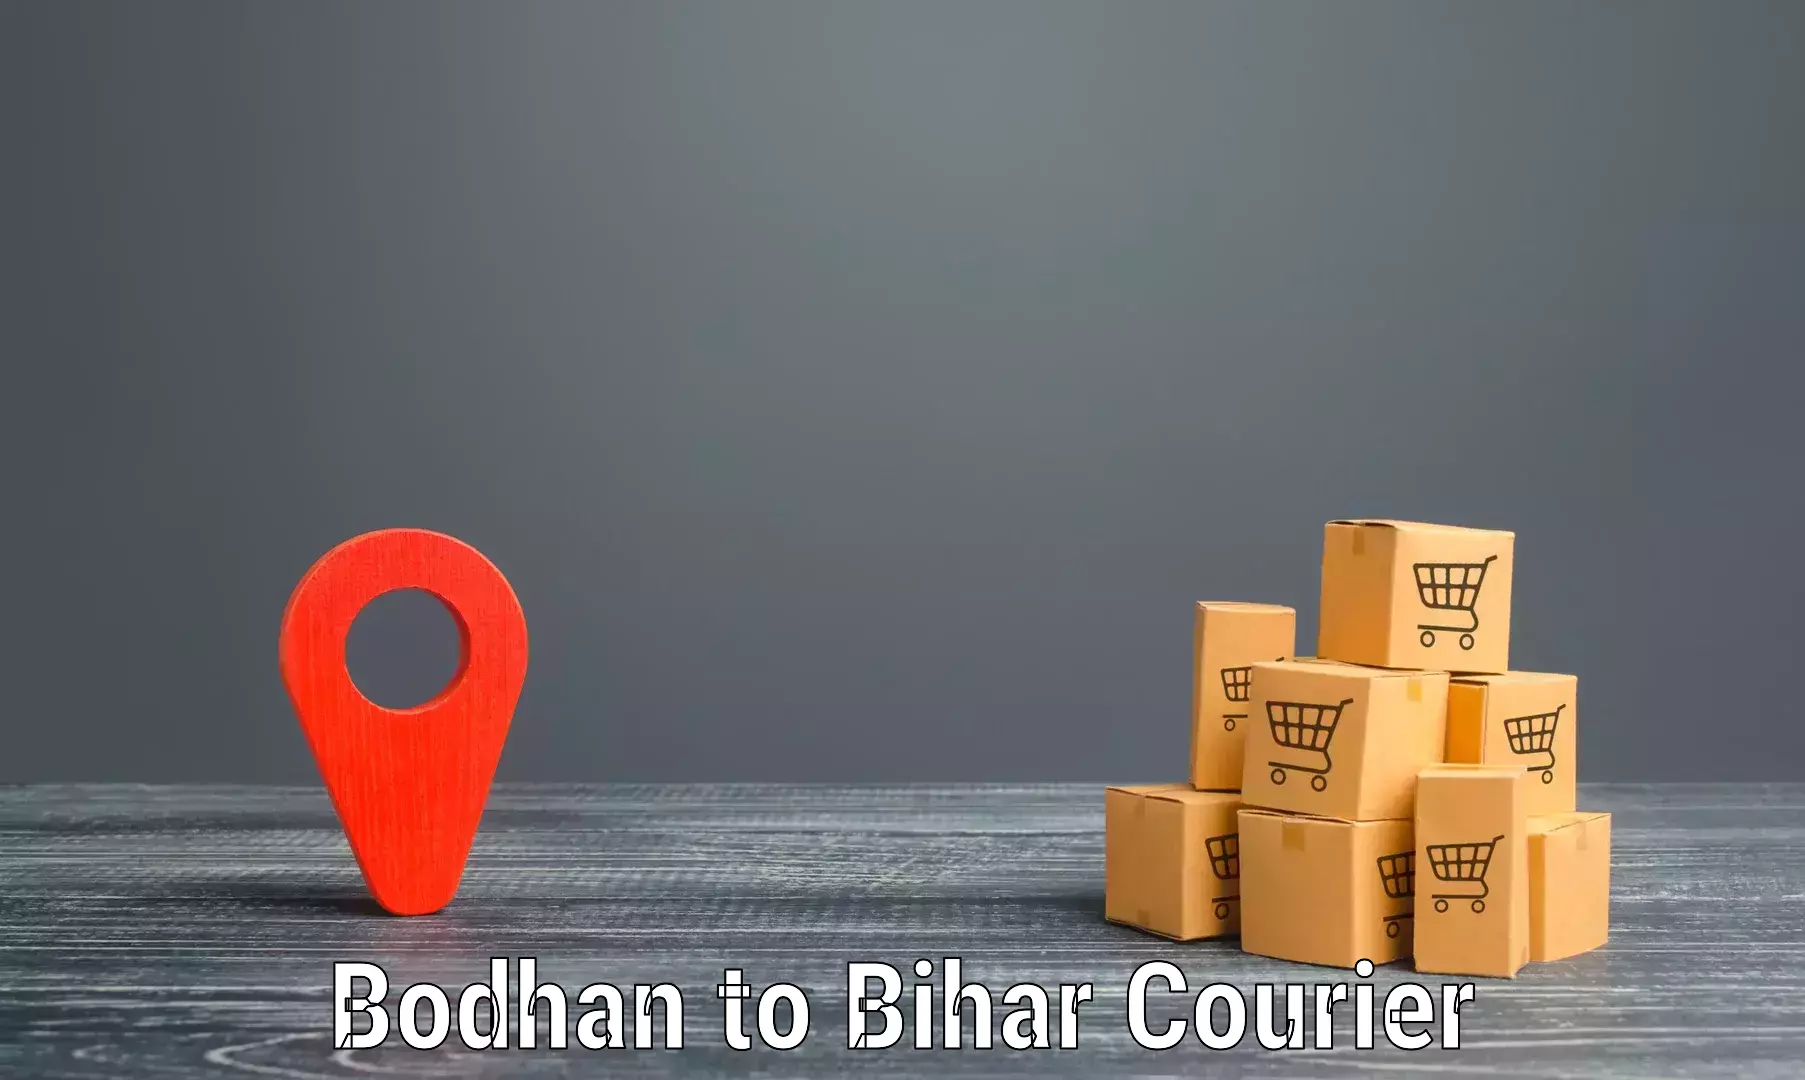 User-friendly delivery service Bodhan to Sheikhpura